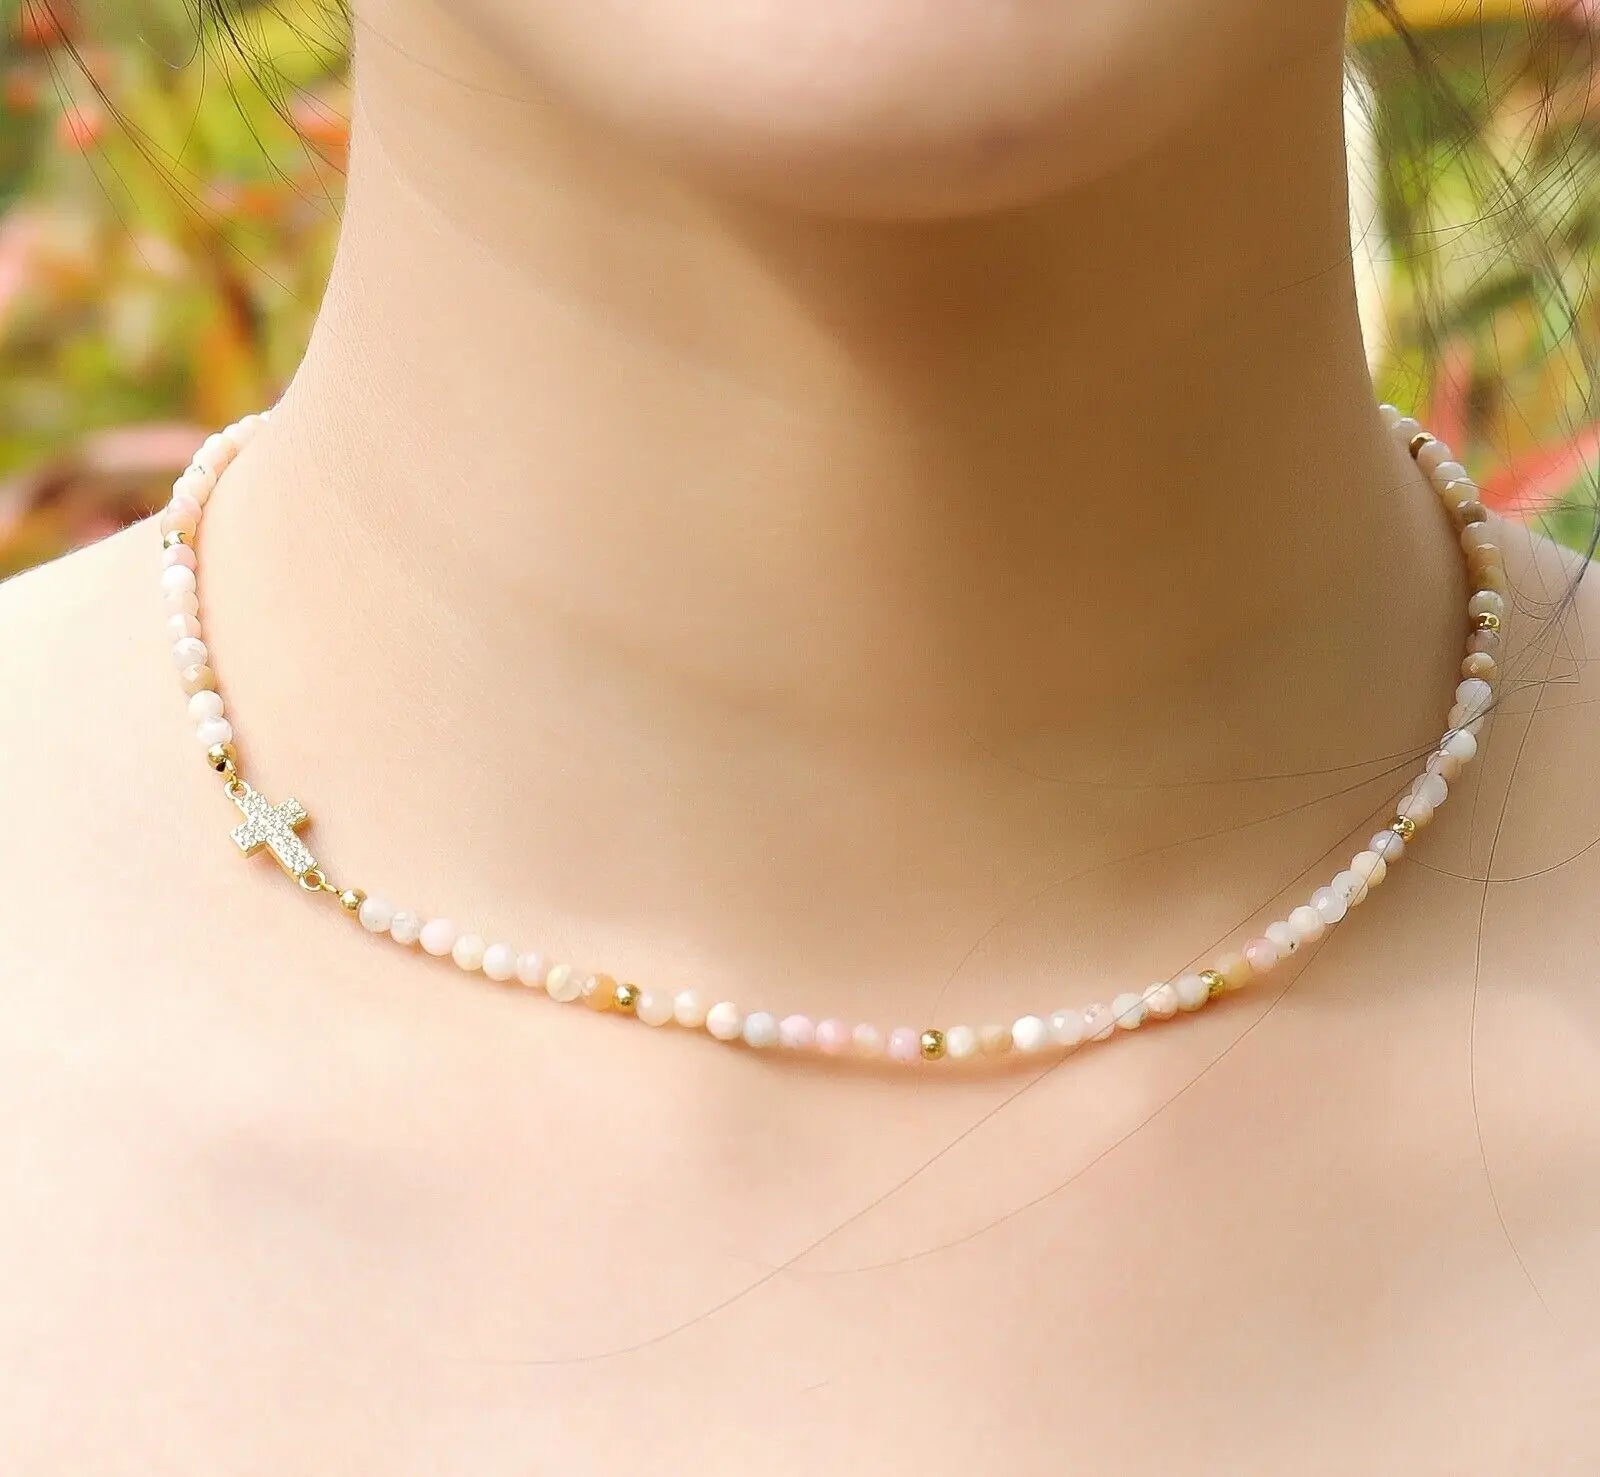 Pink Opal Beads Gemstones Women Necklace Choker with Cross Faith Necklace 15